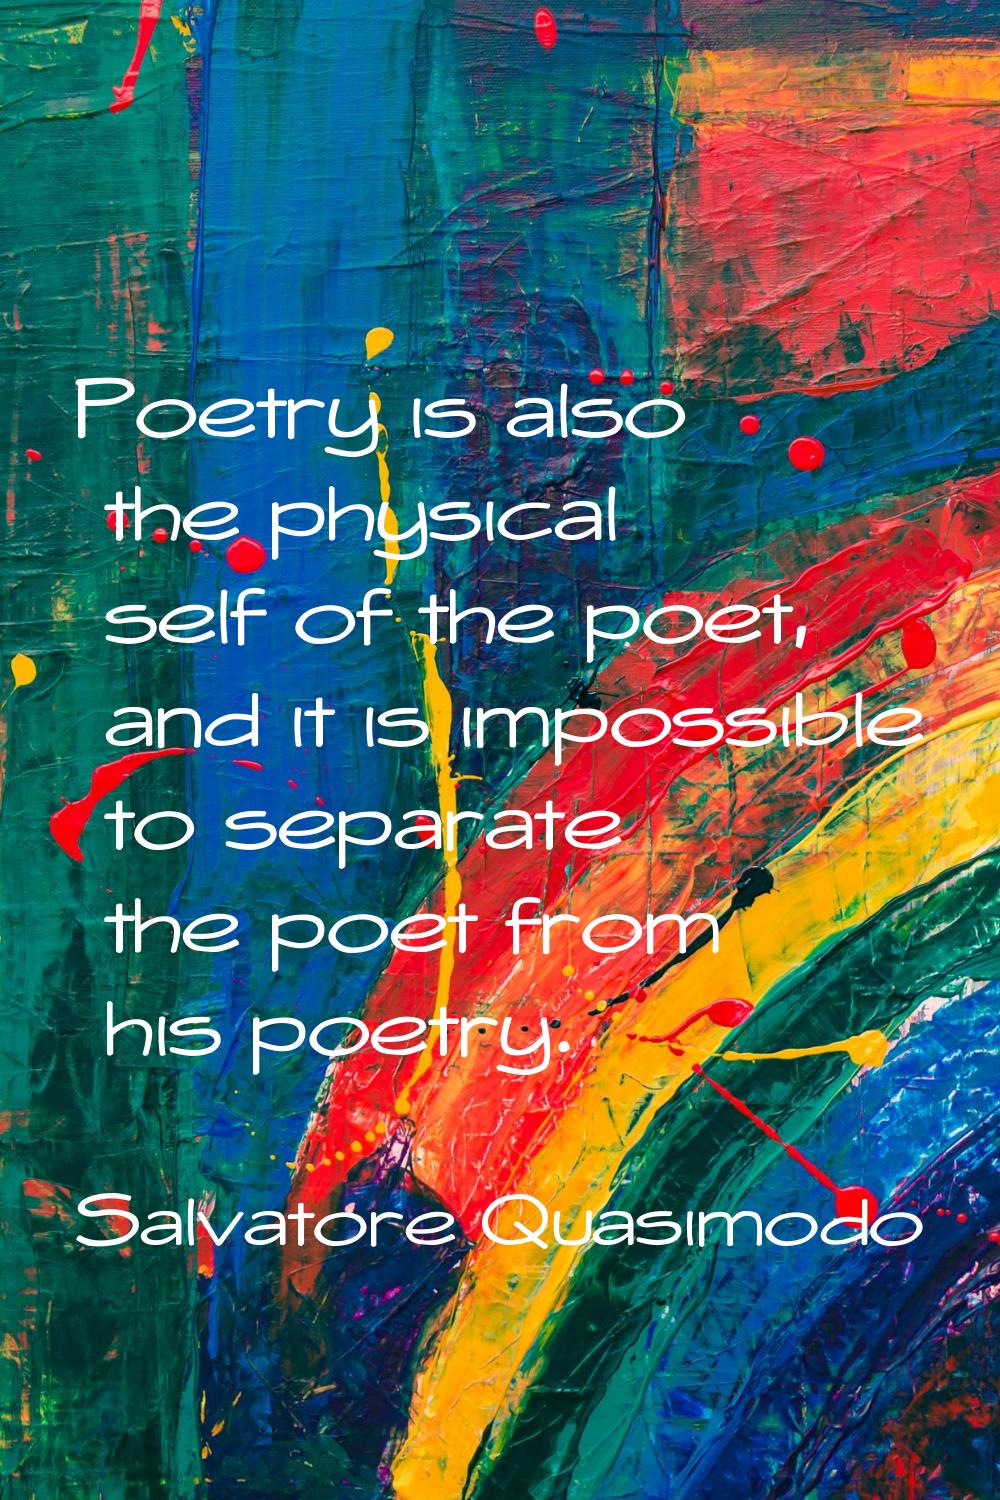 Poetry is also the physical self of the poet, and it is impossible to separate the poet from his po